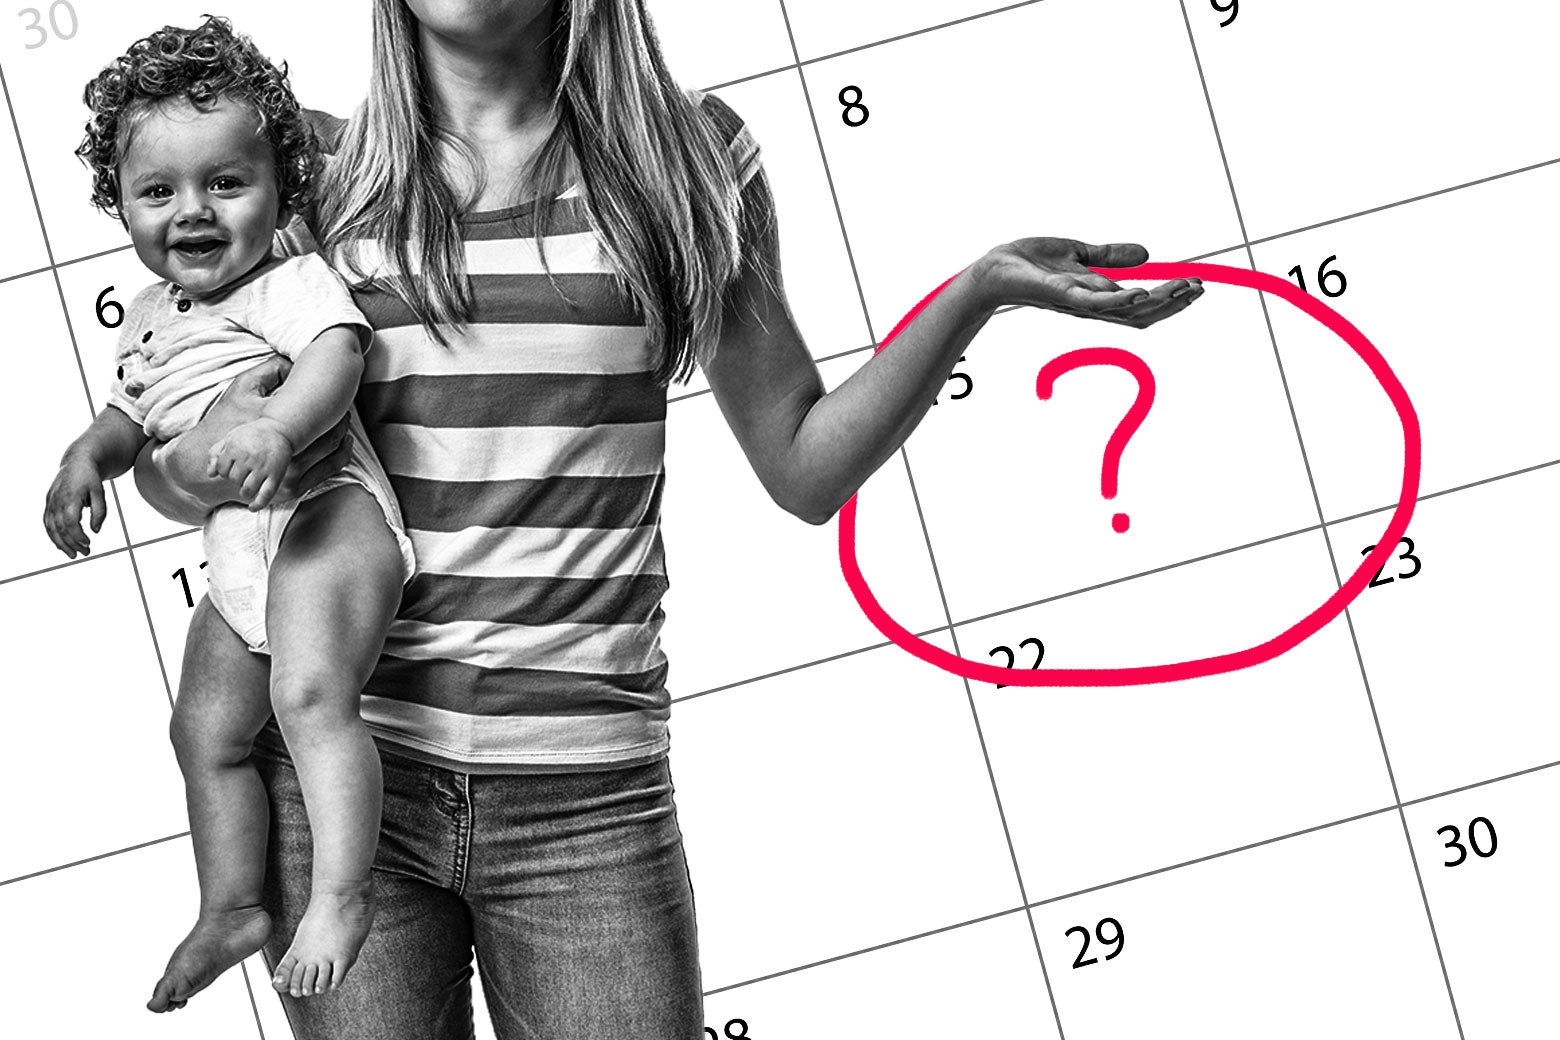 A person holds a baby in front of an image of a calendar with an illustrated question mark on it.